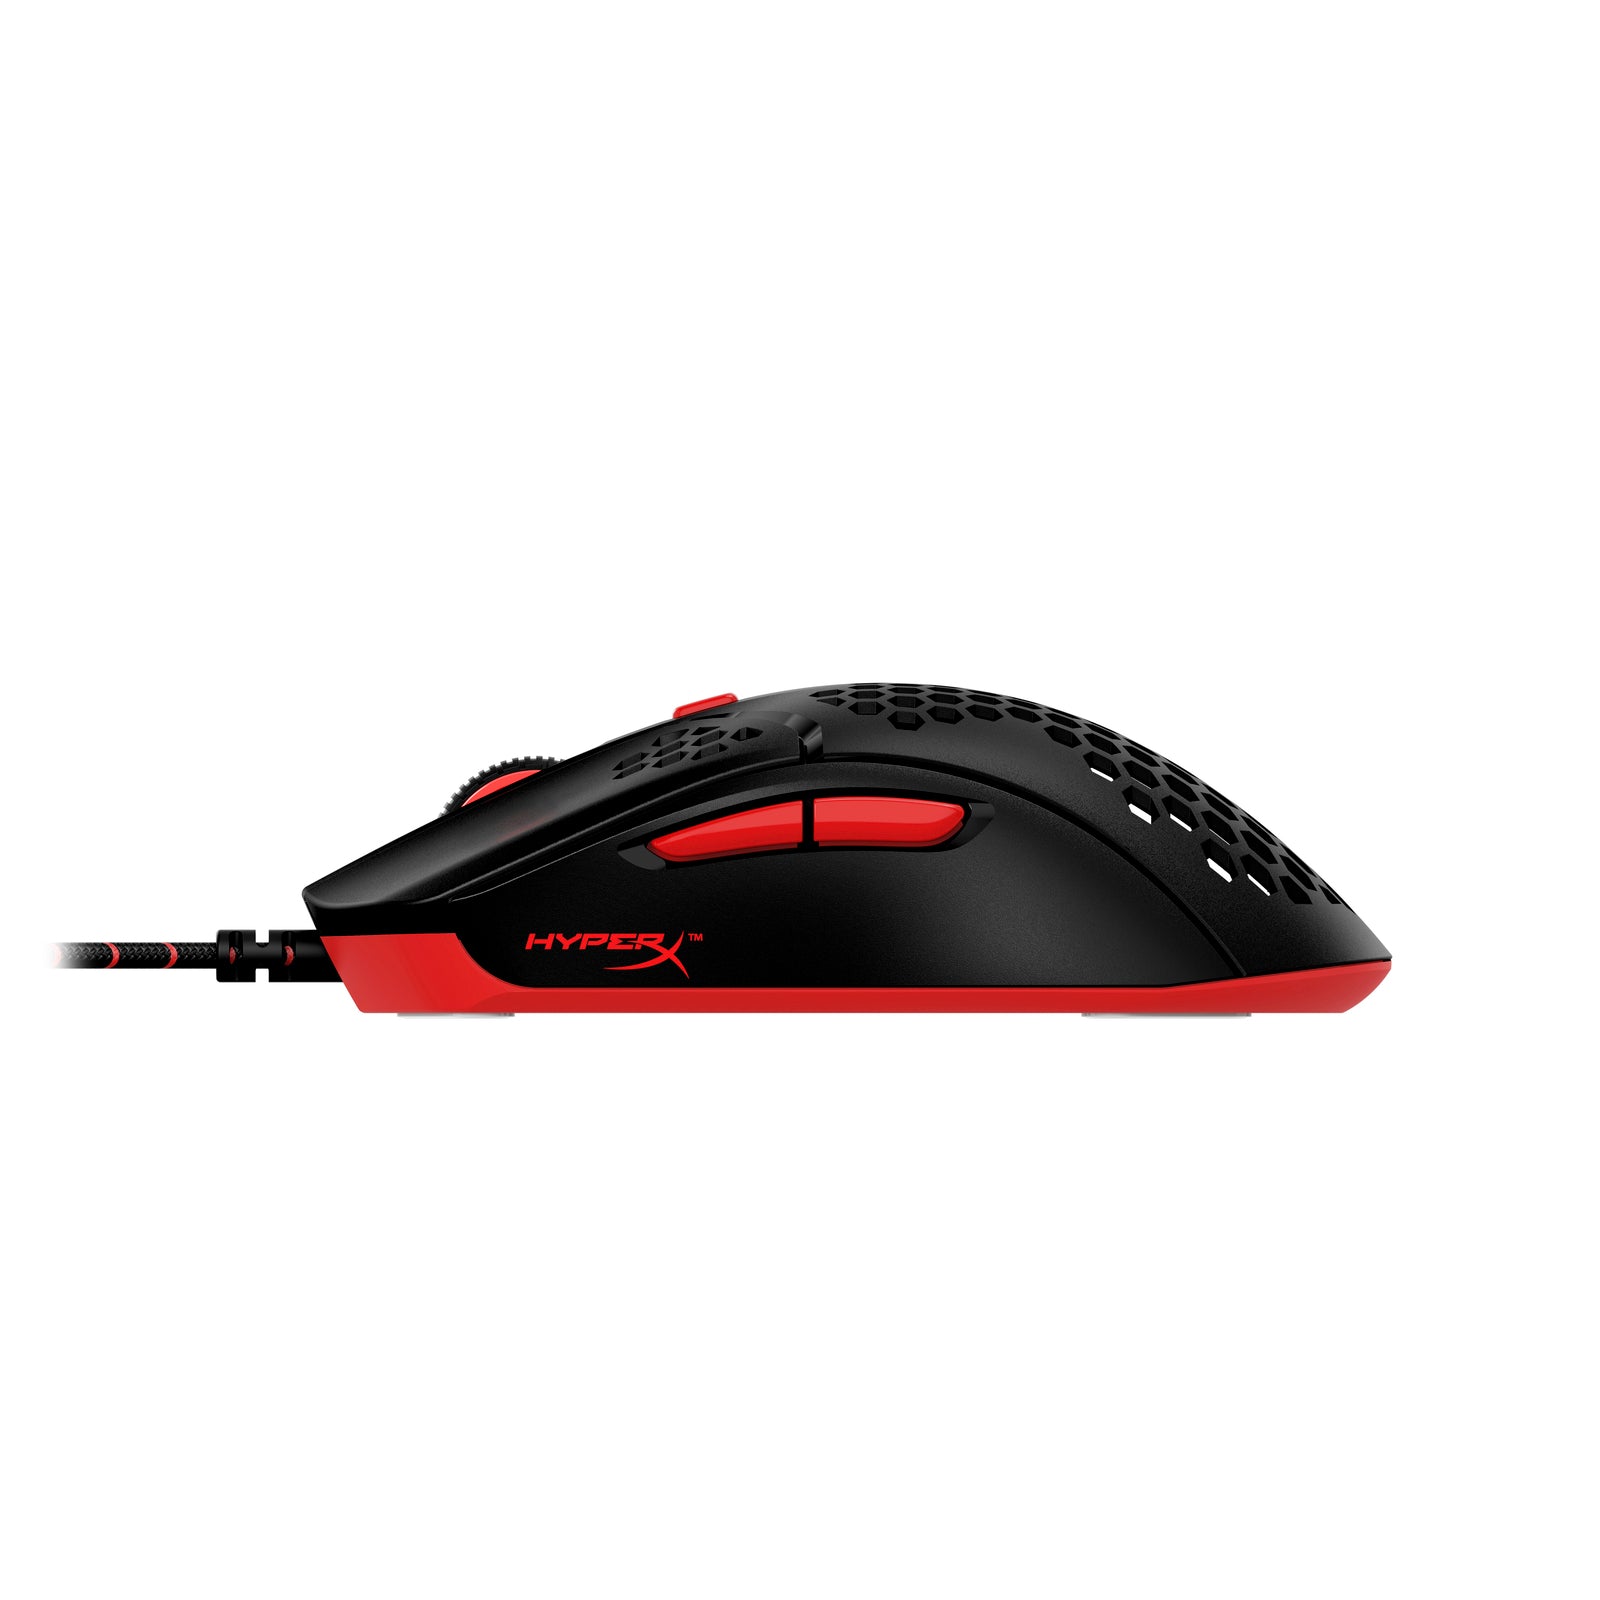 HyperX Pulsefire Haste Black-Red Gaming Mouse Side View